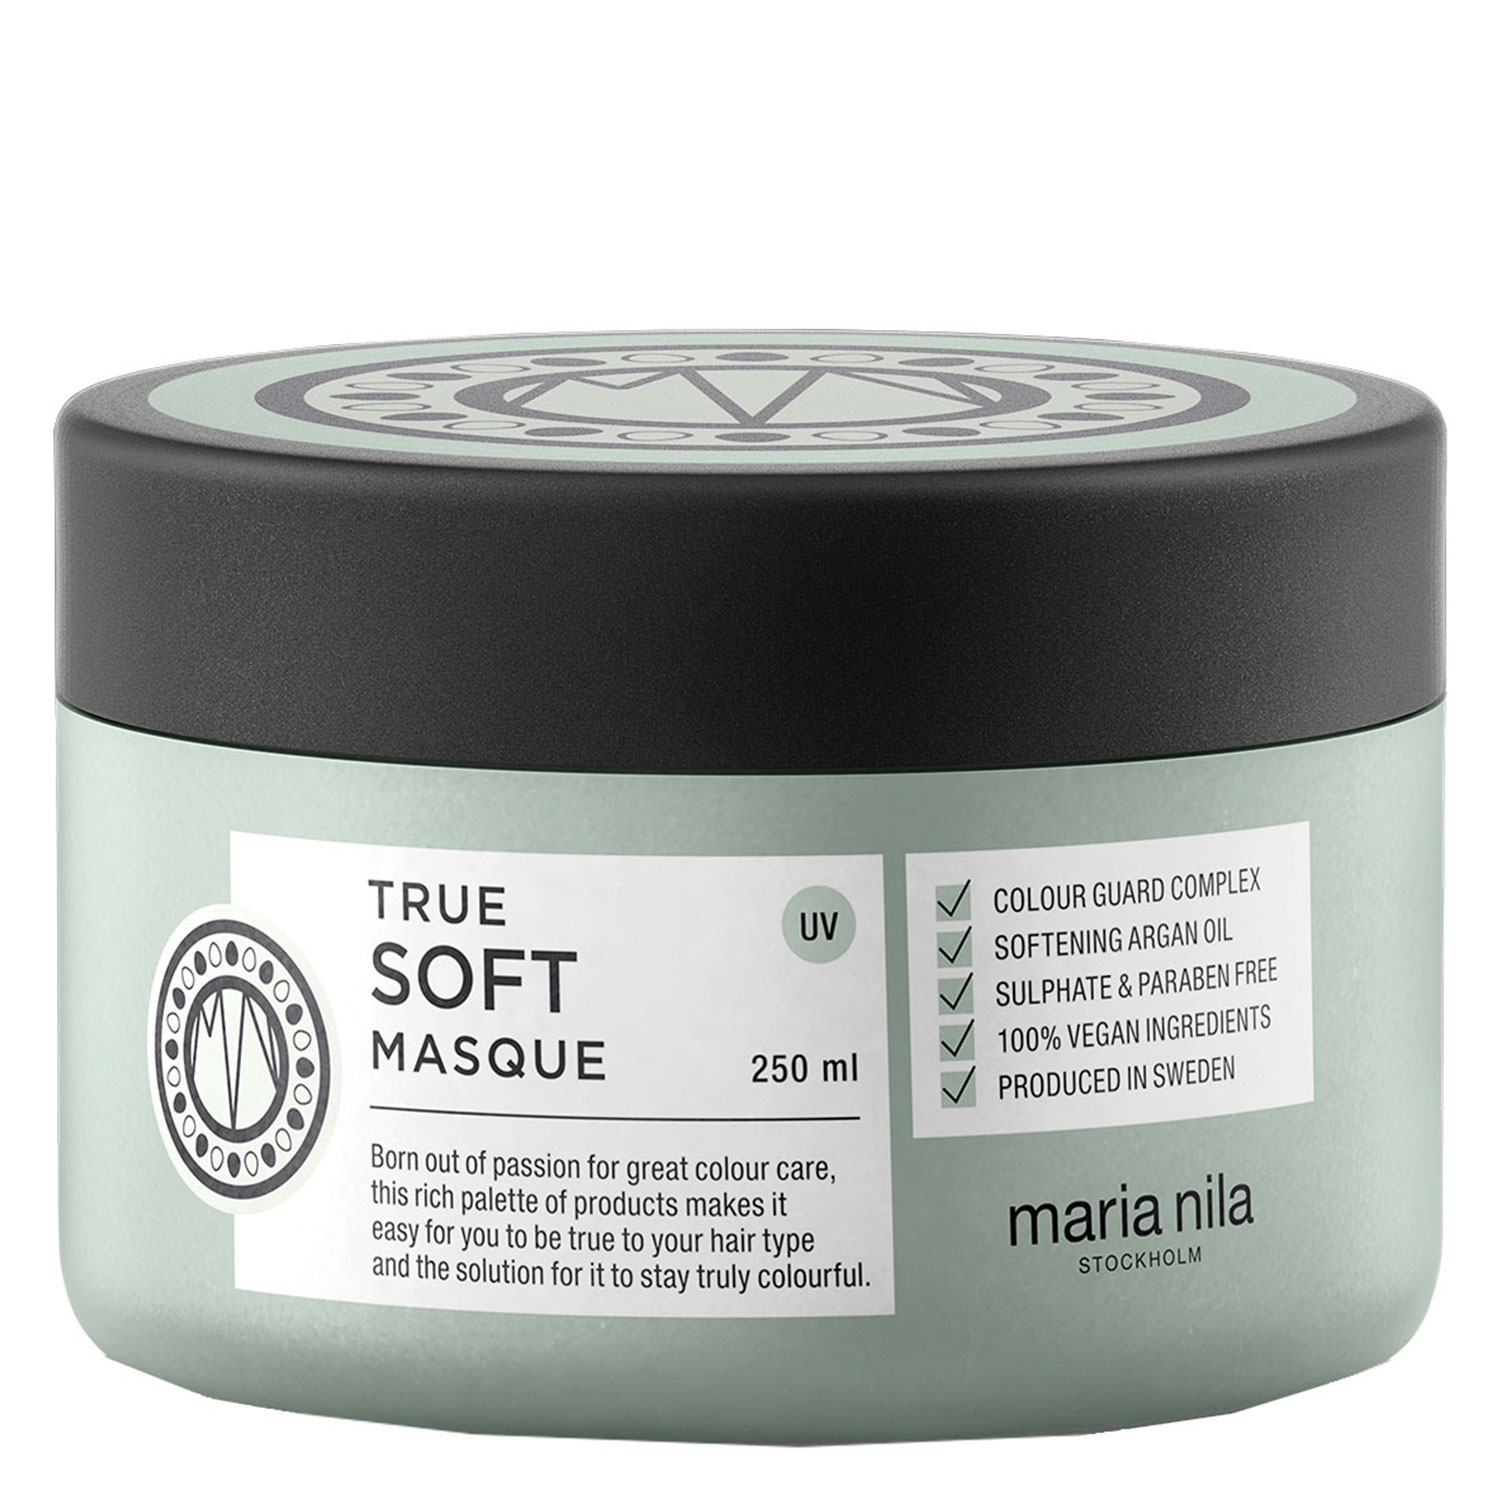 Product image from Care & Style - True Soft Masque